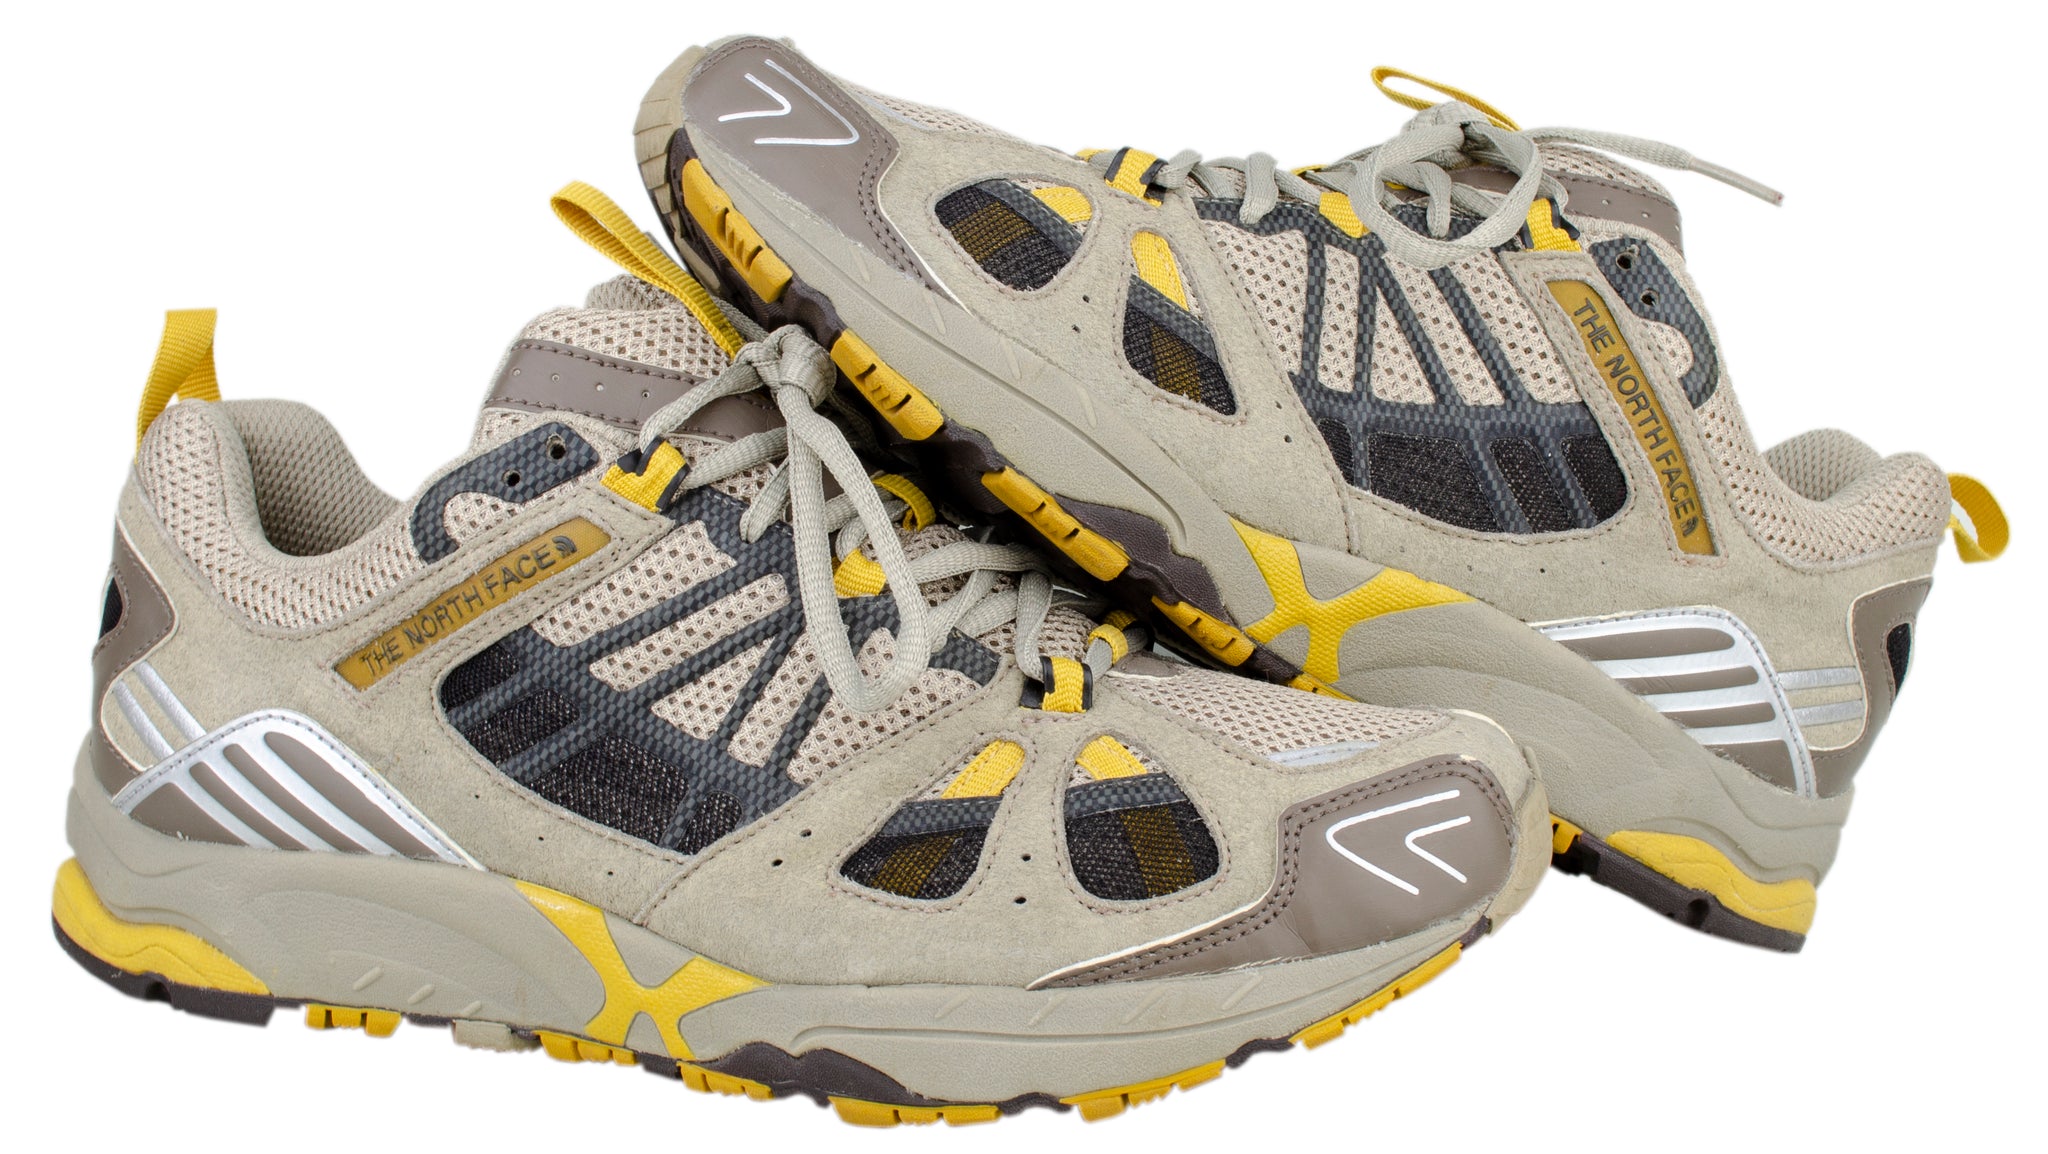 The North Face "Fire Road" - Trail Runner